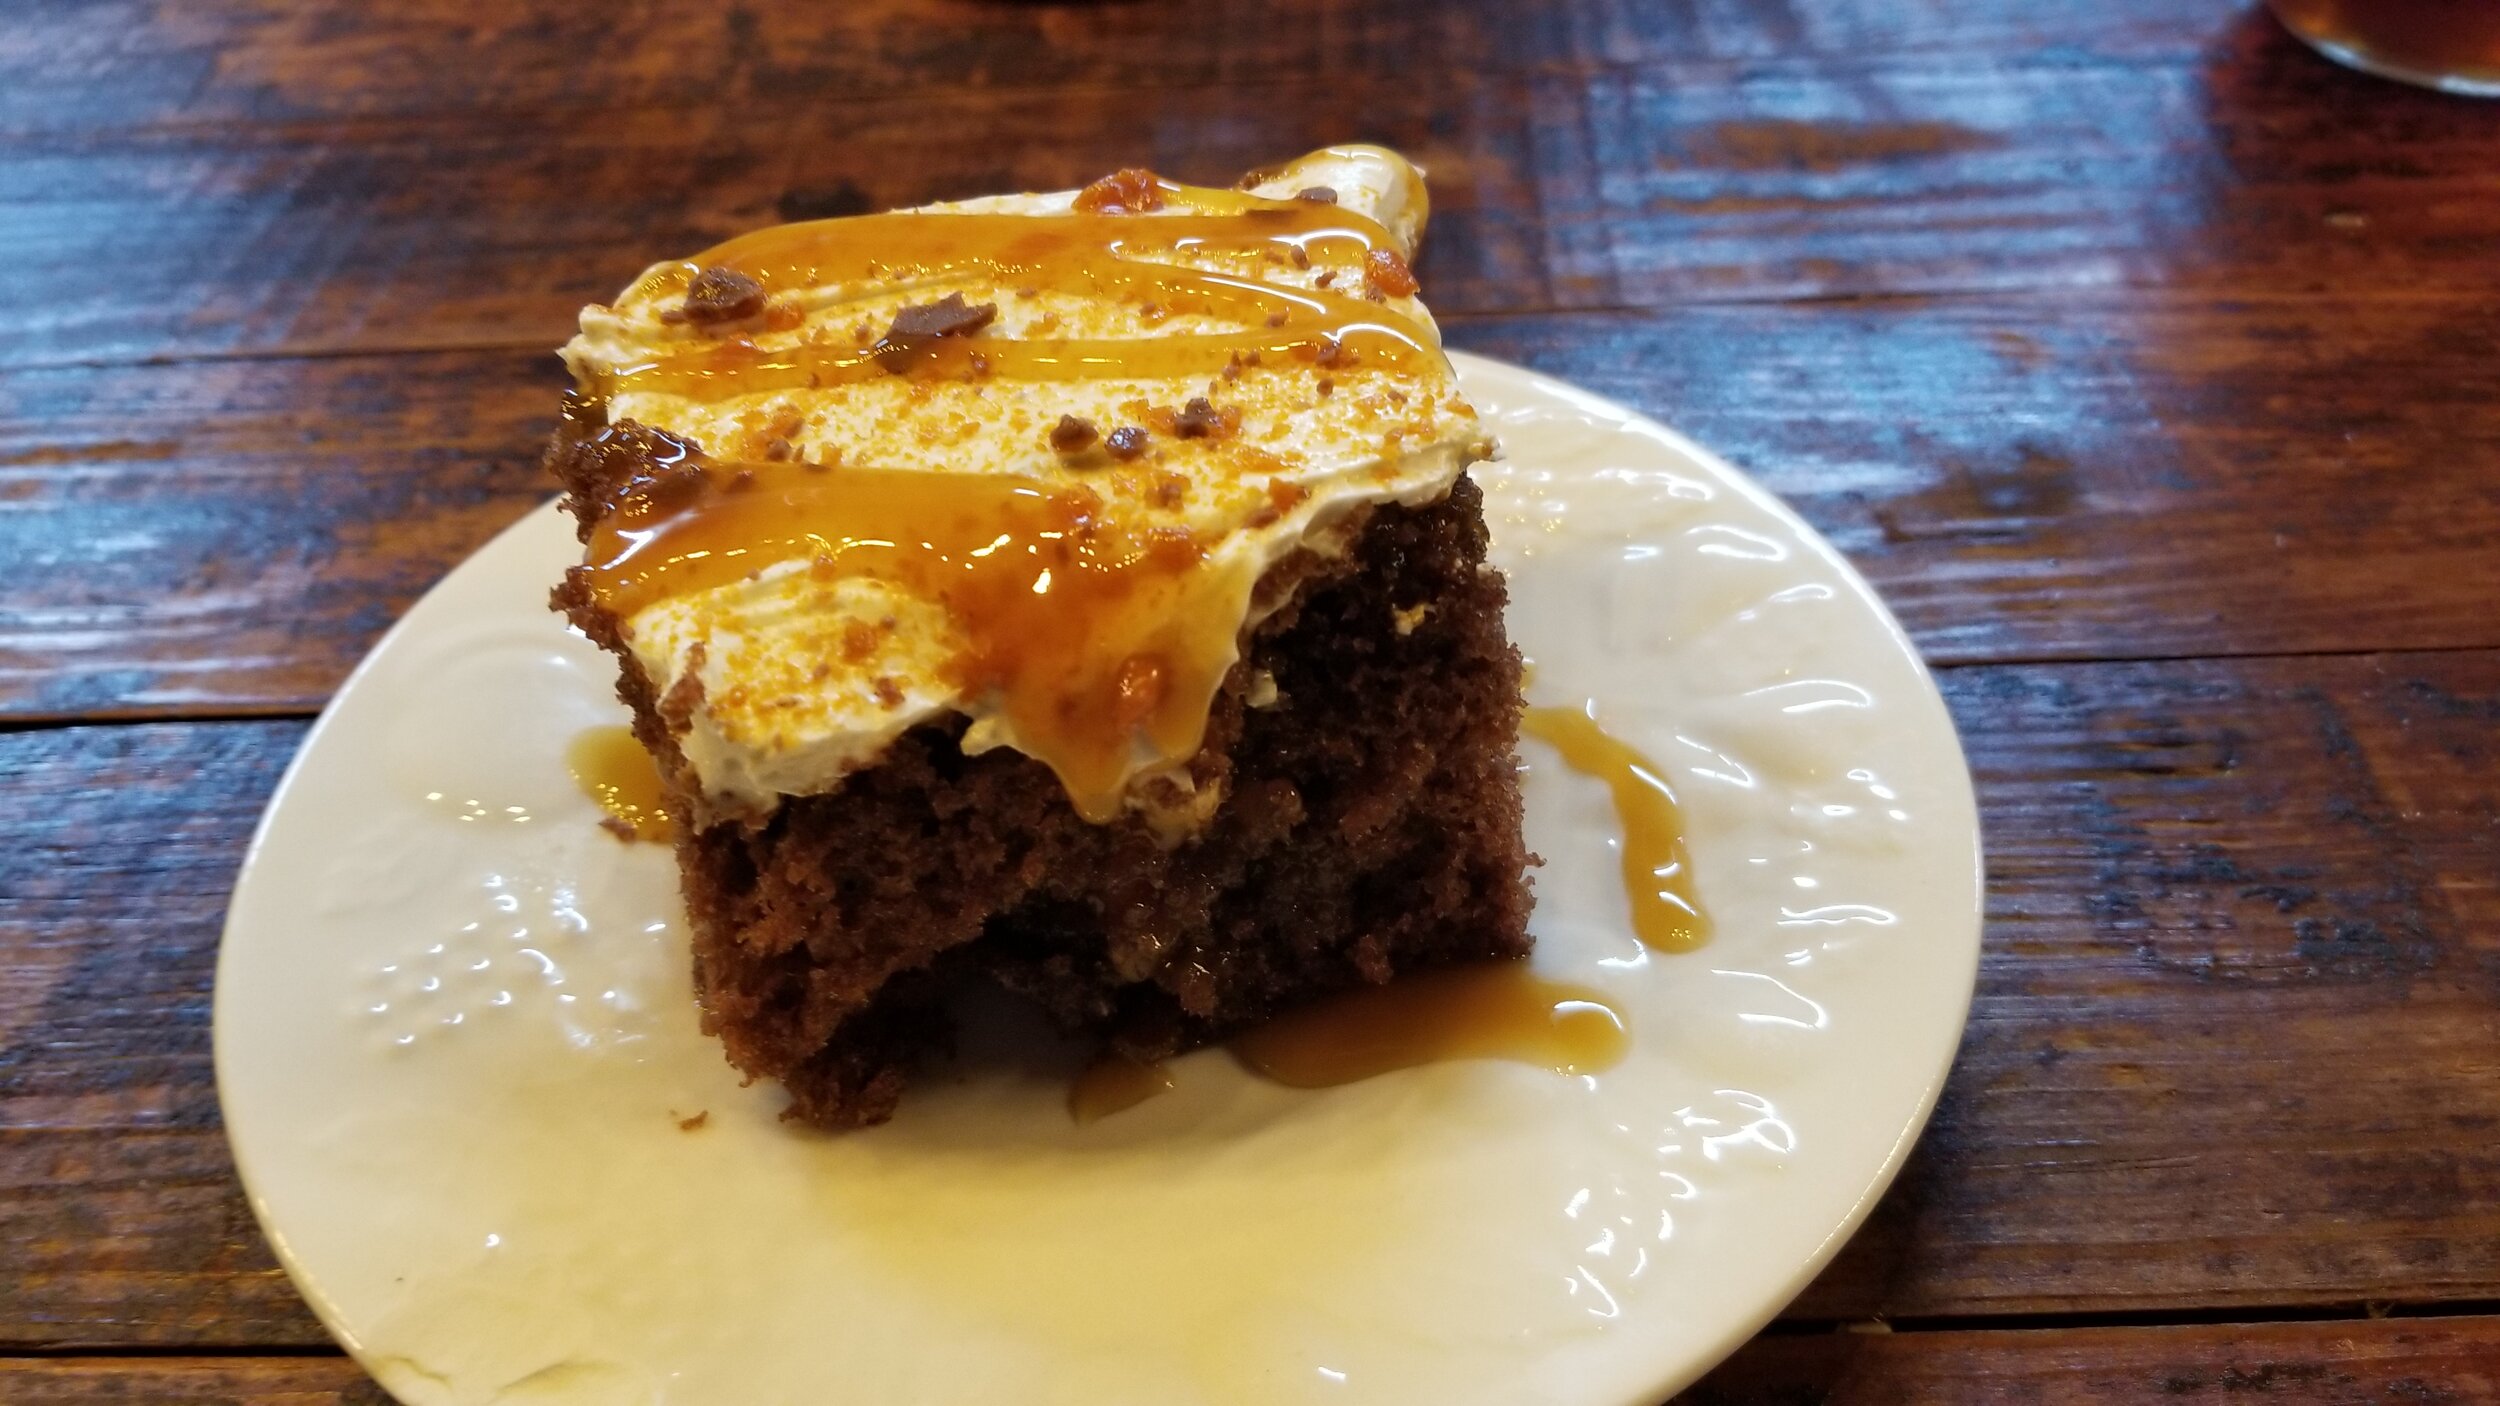 Butterfinger cake at 1806 General Store